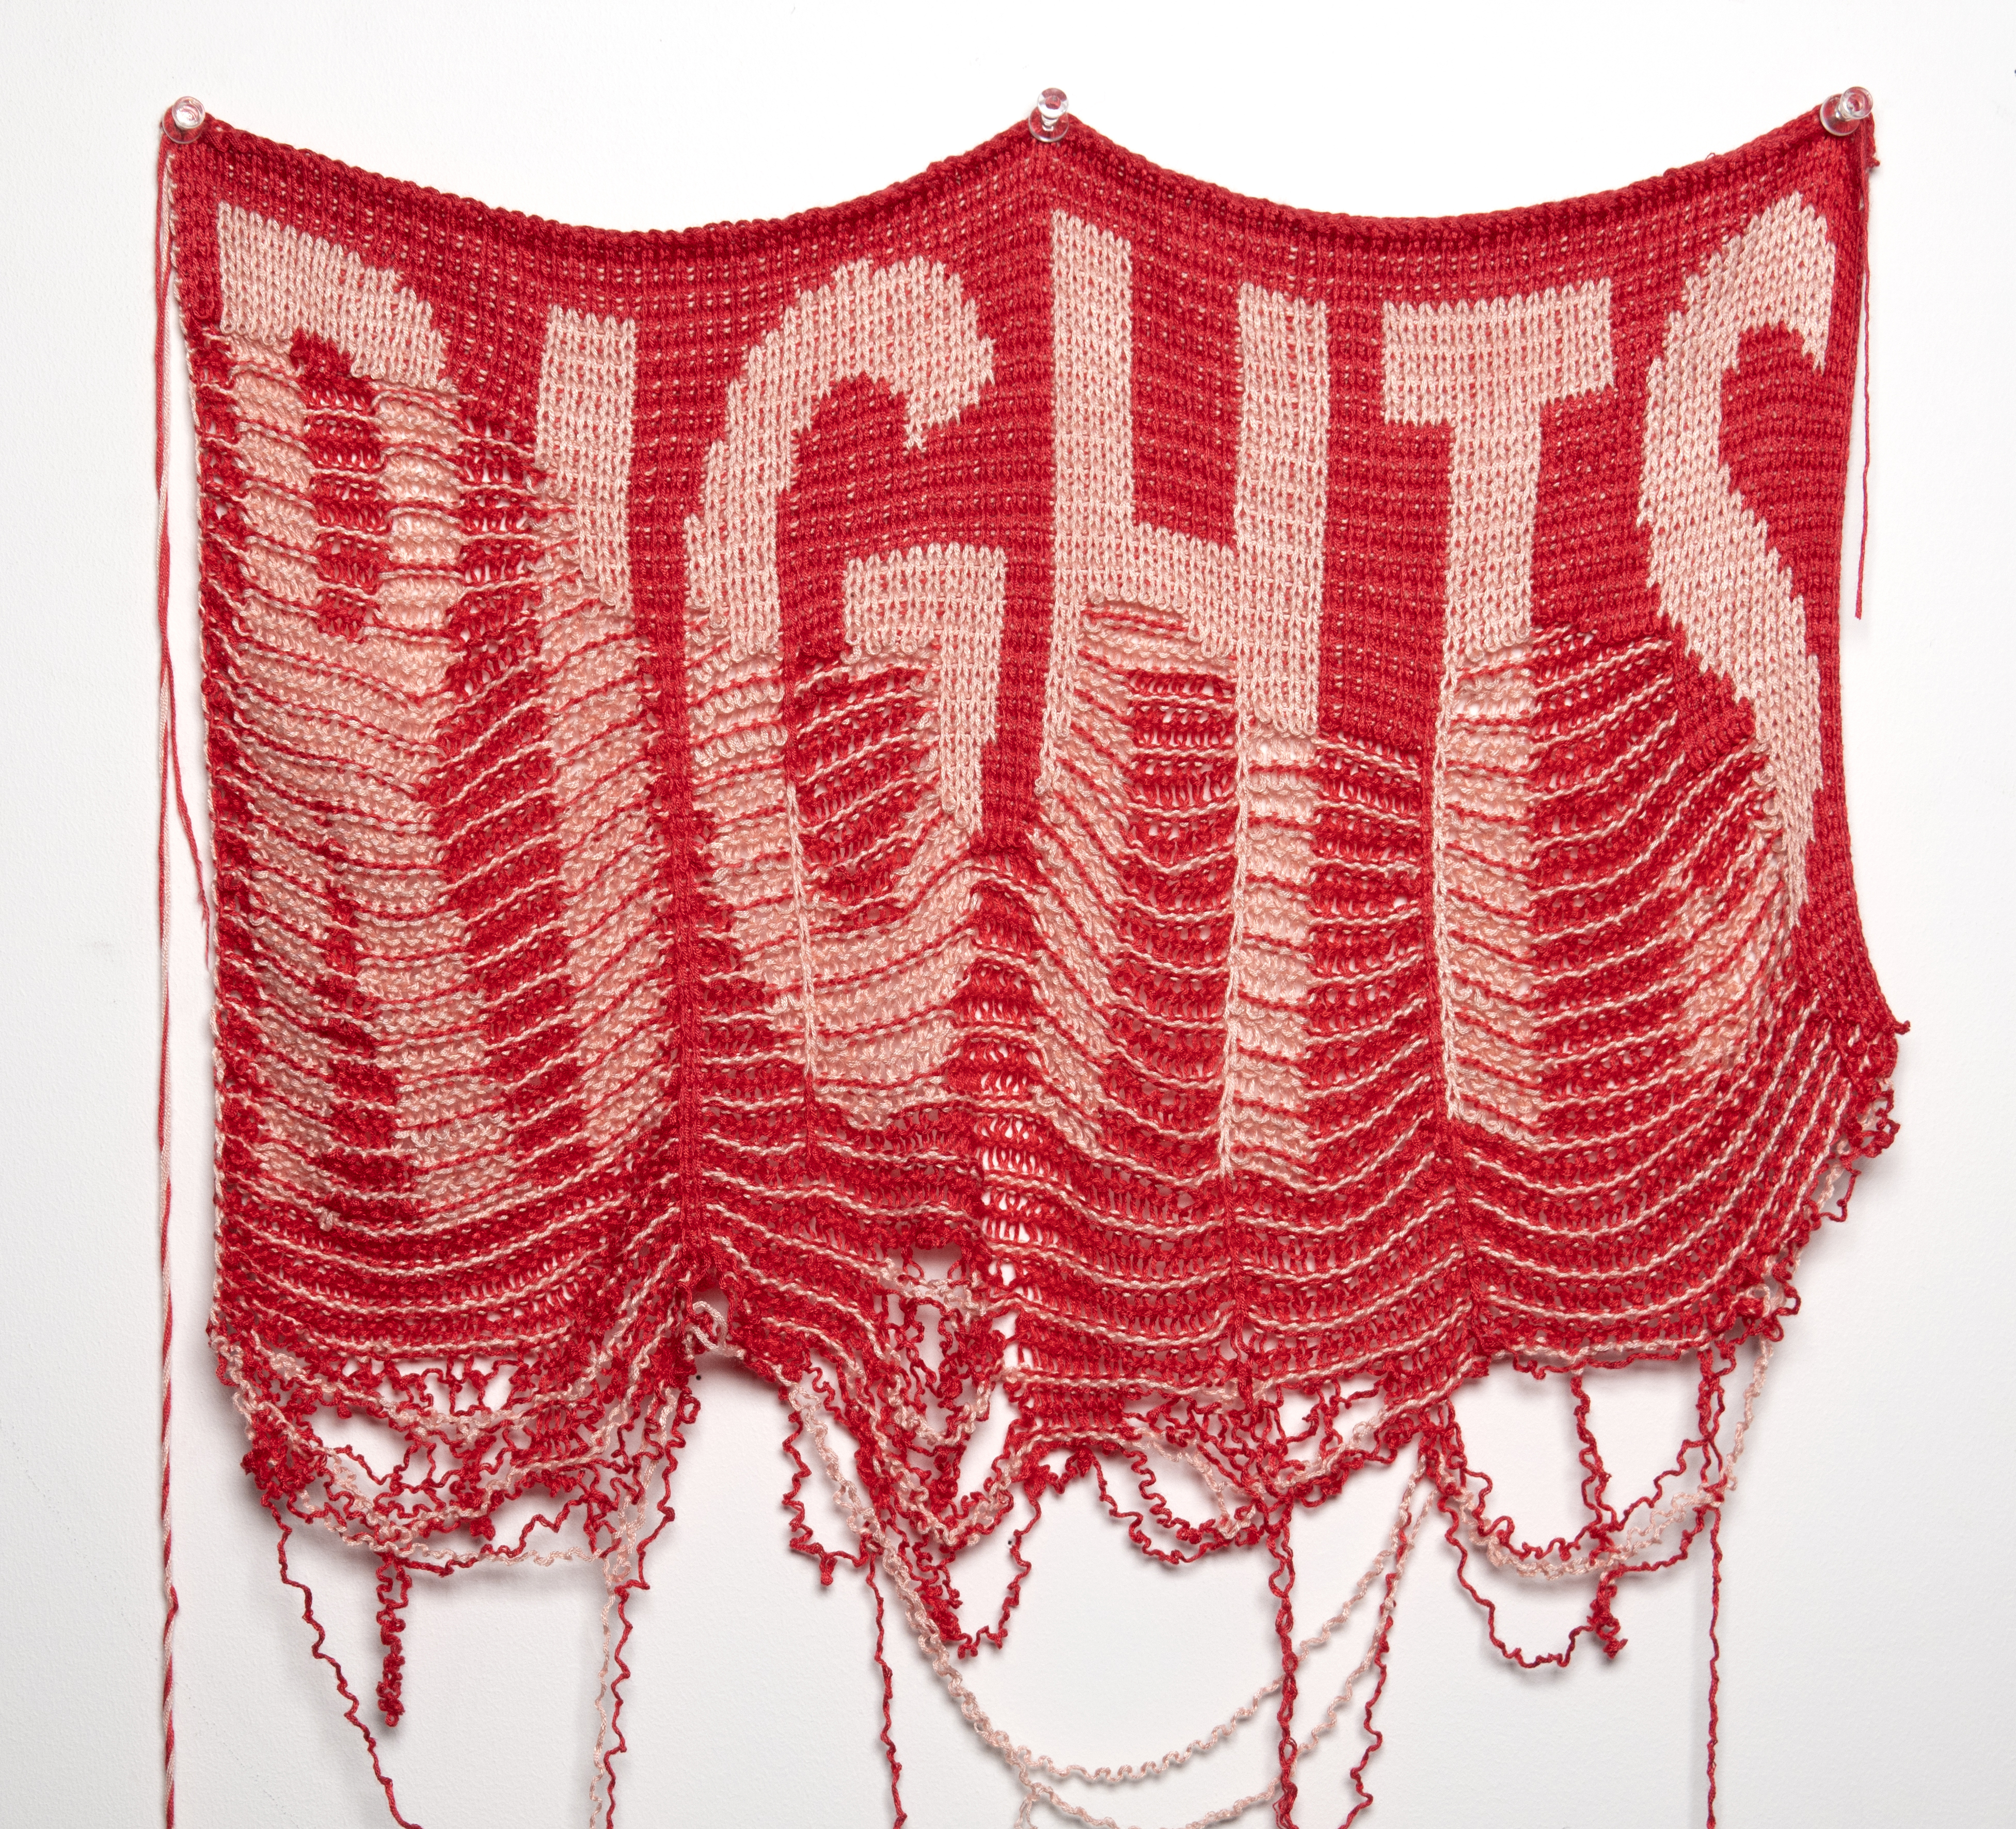 A video still of an unraveling red and pink knit cloth on which RIGHTS is inscribed 